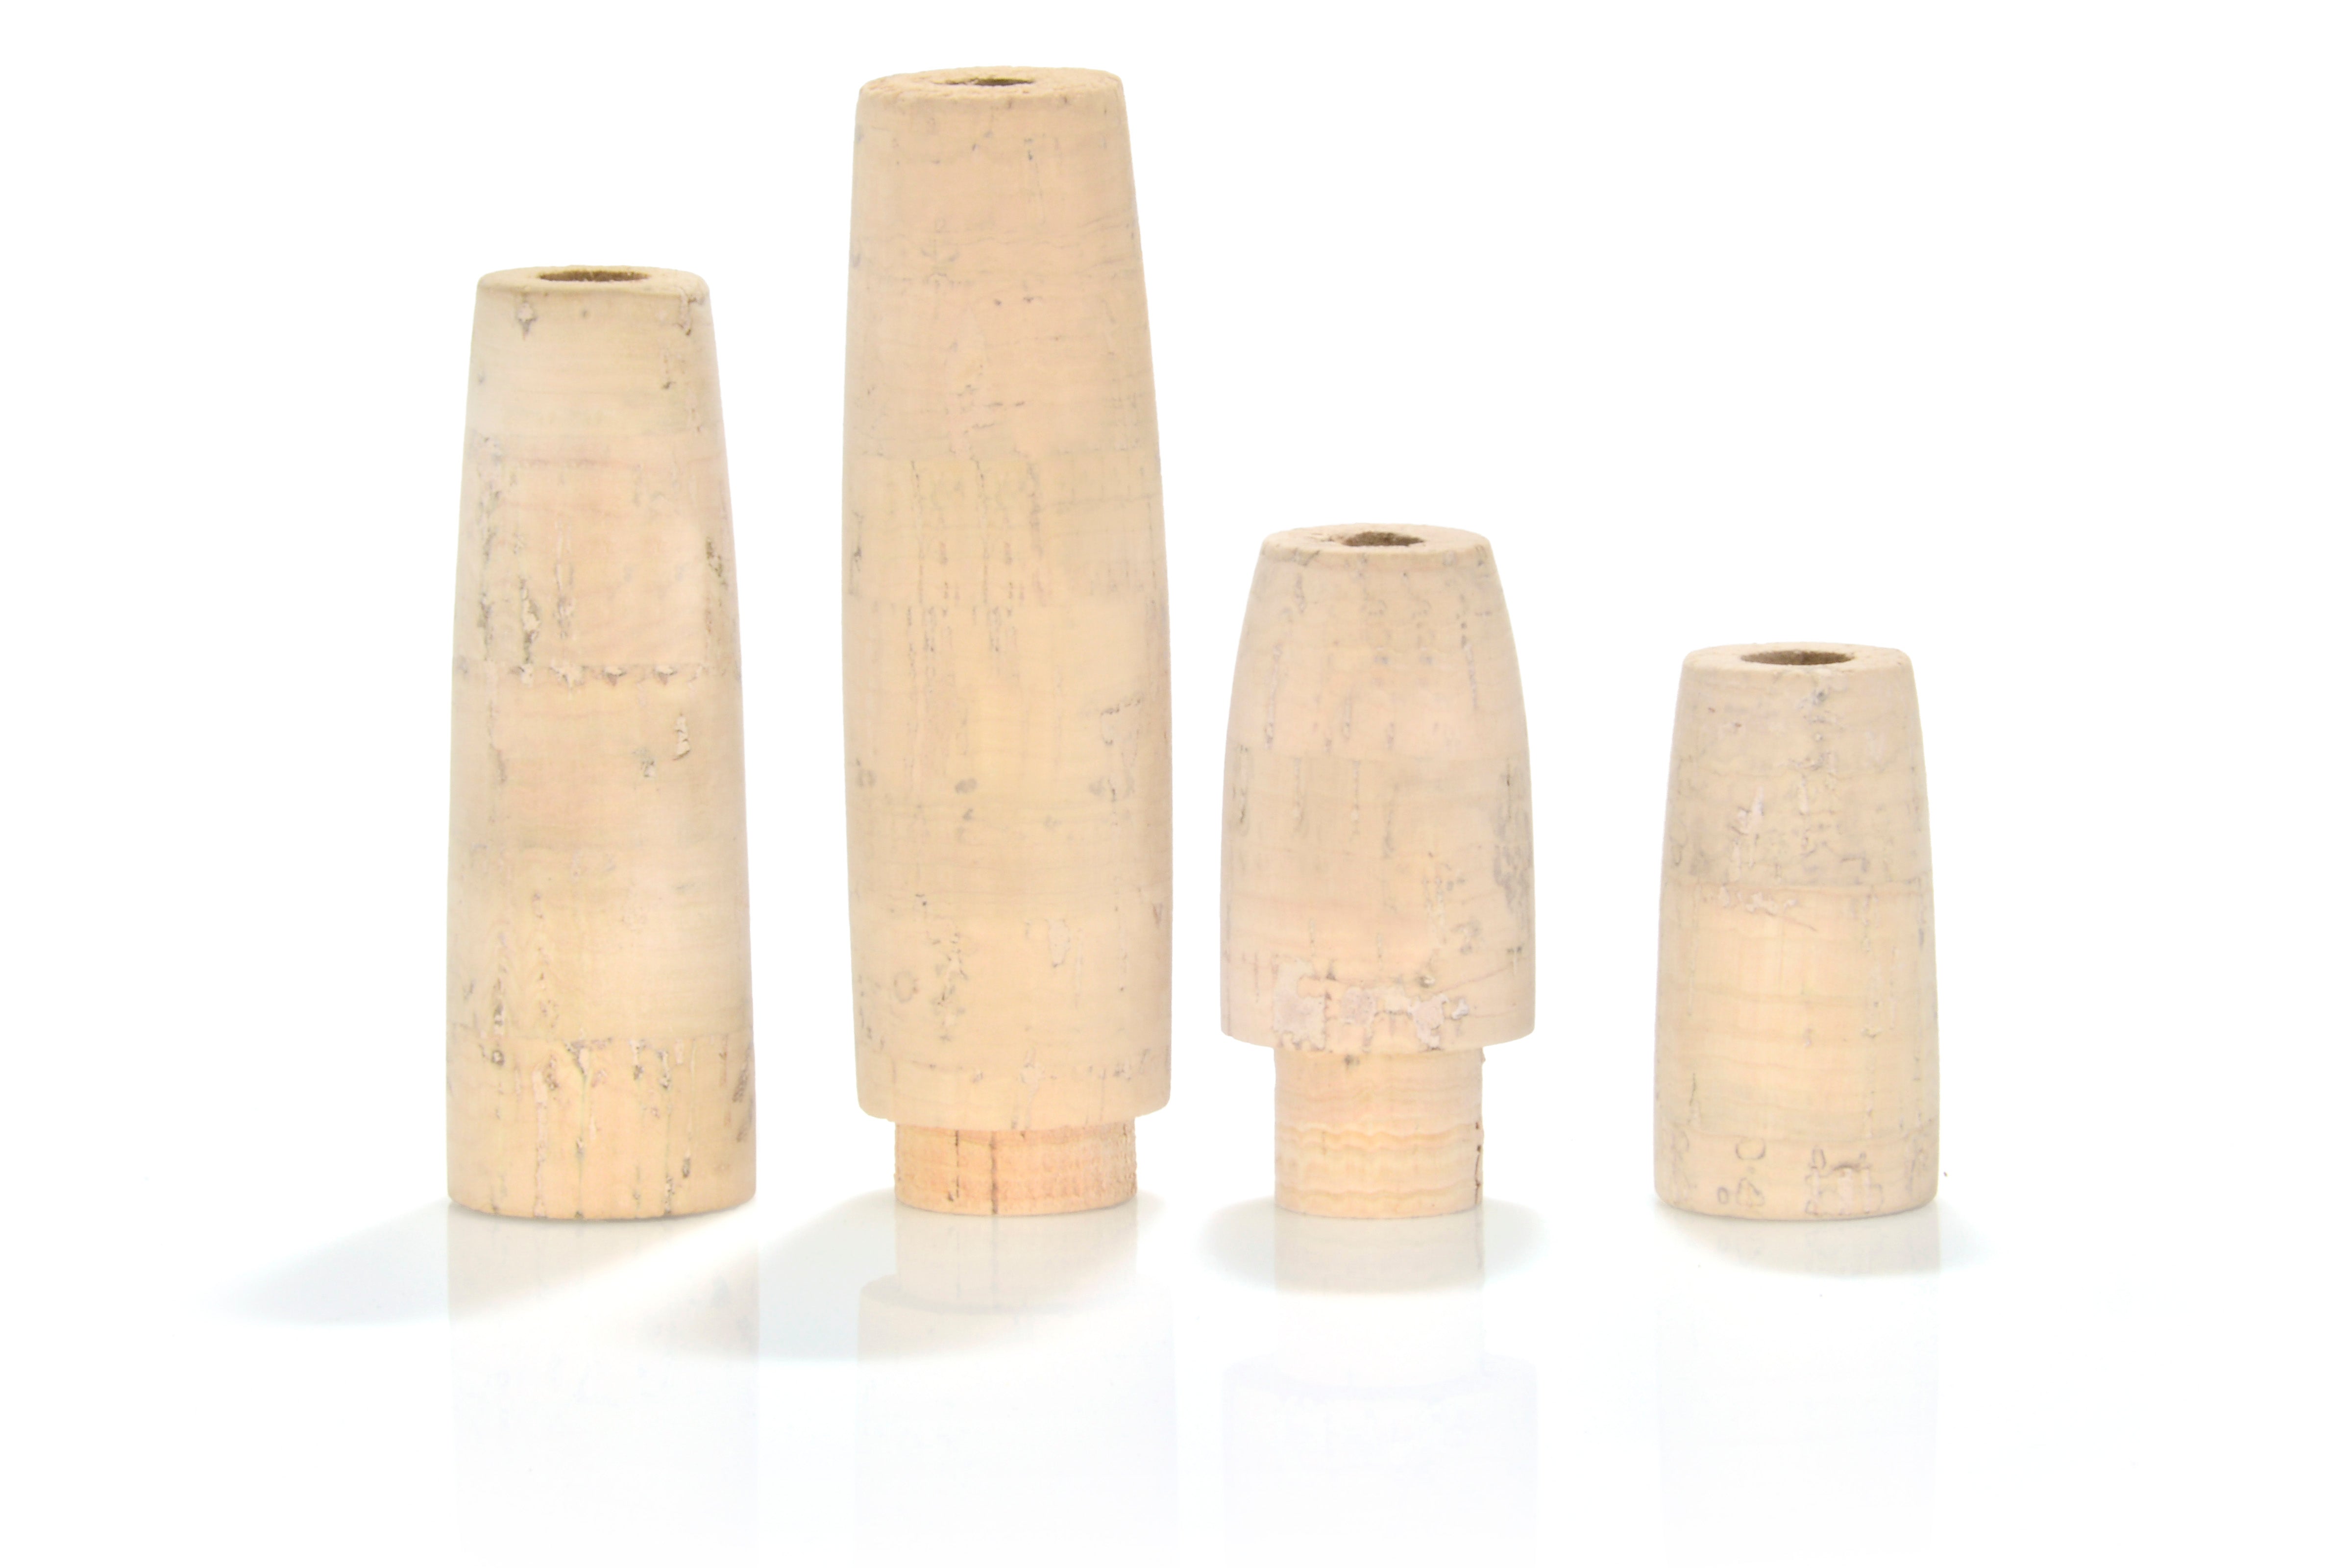 Cork Rings - large bore - Corks, Cork Products & Fighting Butts - Handles &  Grips